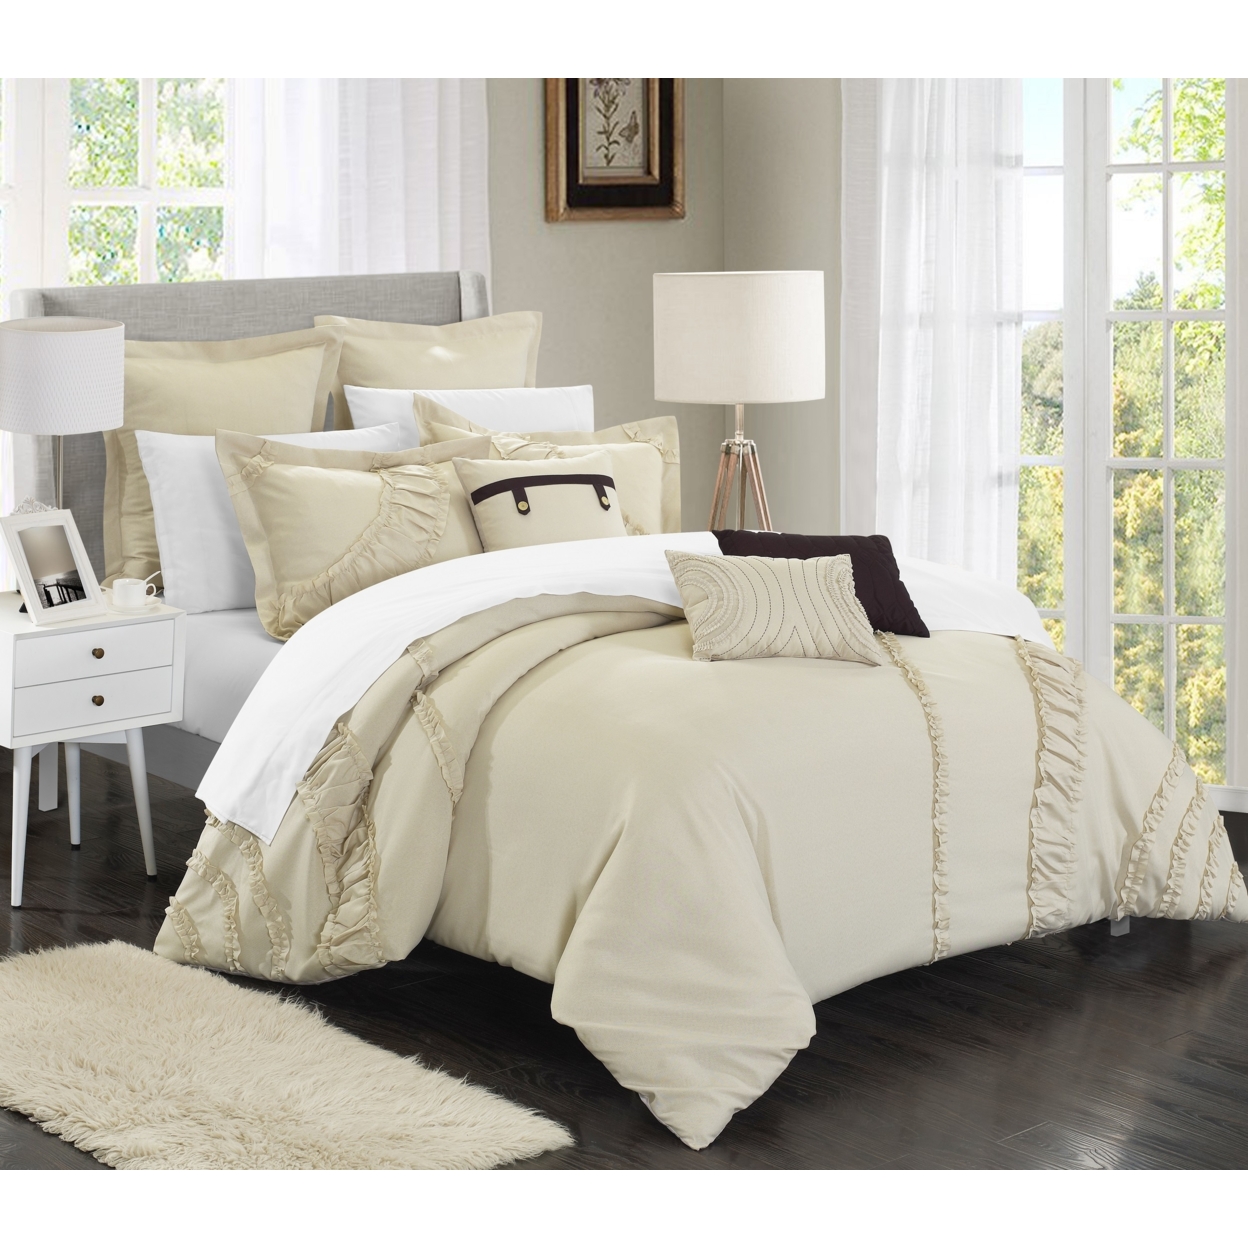 Chic Home 8 Piece Lucerne NEW FAUX LINEN FABRIC COLLECTION OVERSIZED AND OVERFILLED Embroidered Comforter Set - Beige, King